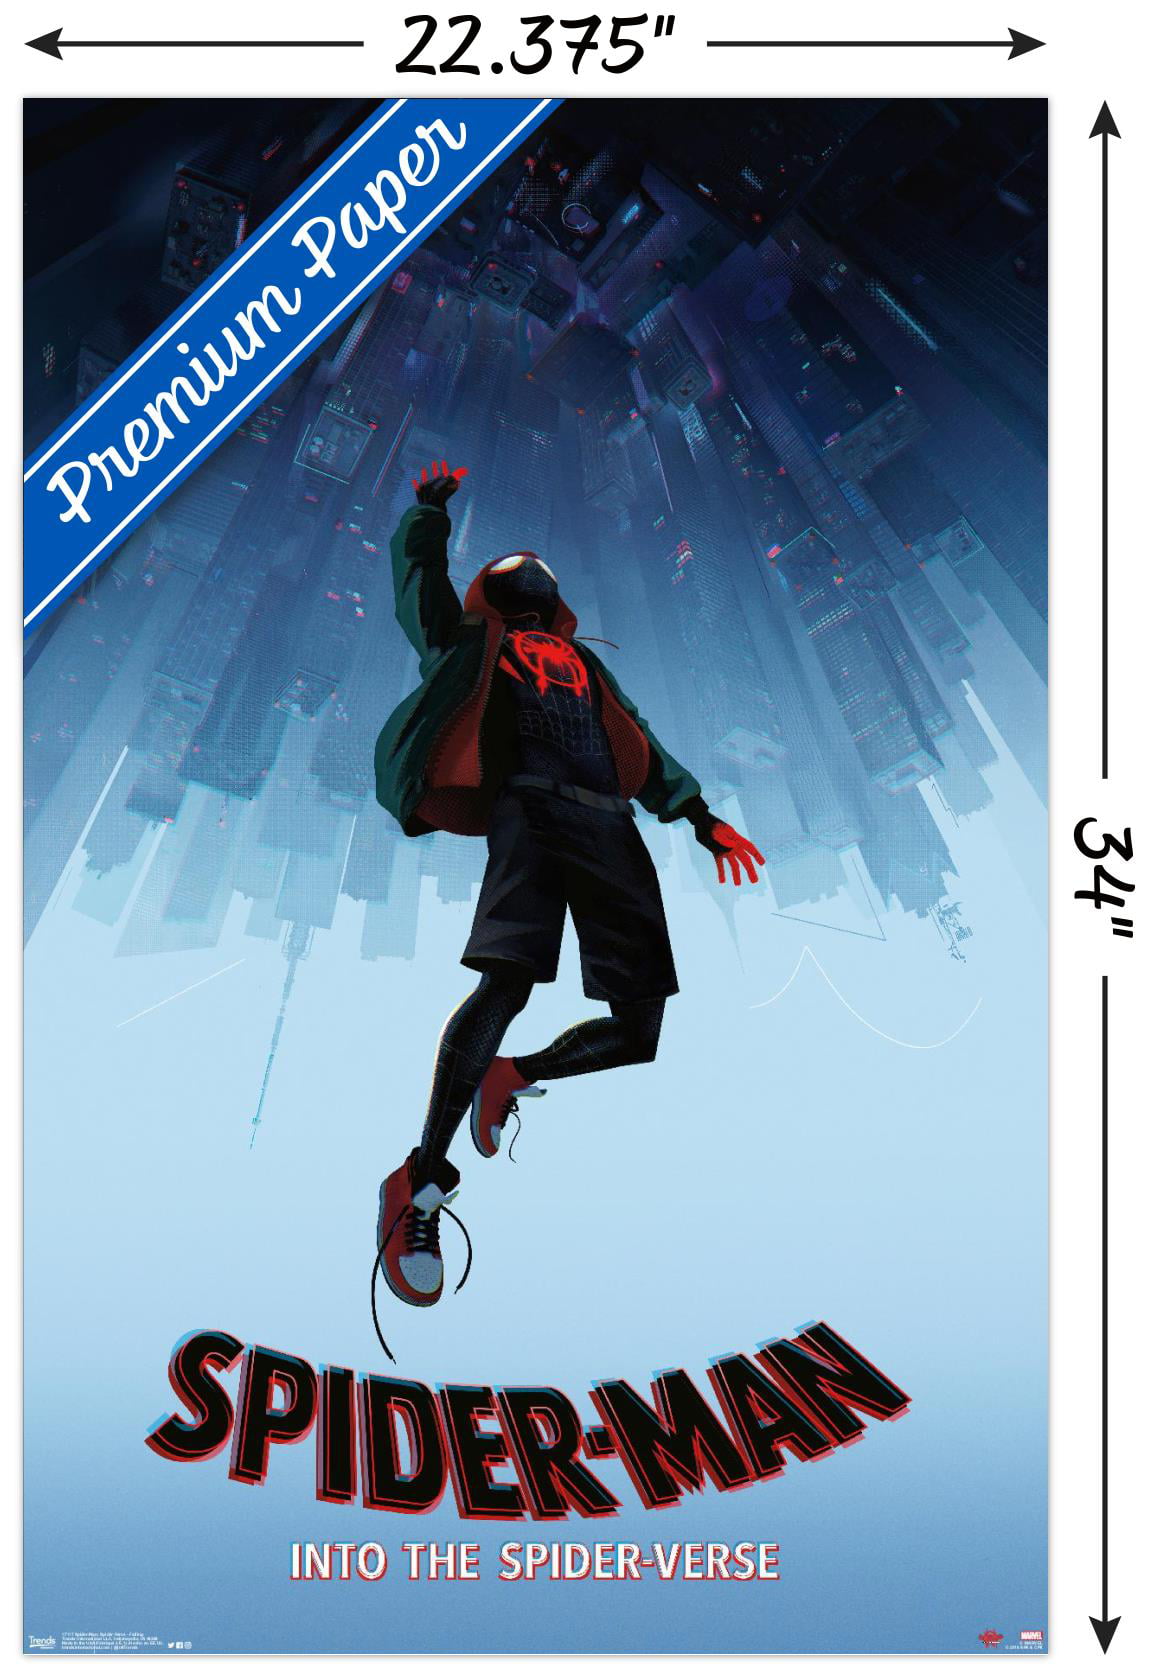 Marvel Spider-Man - Into The Spider-Verse - Falling Wall Poster, 22.375" 34" - Walmart.com